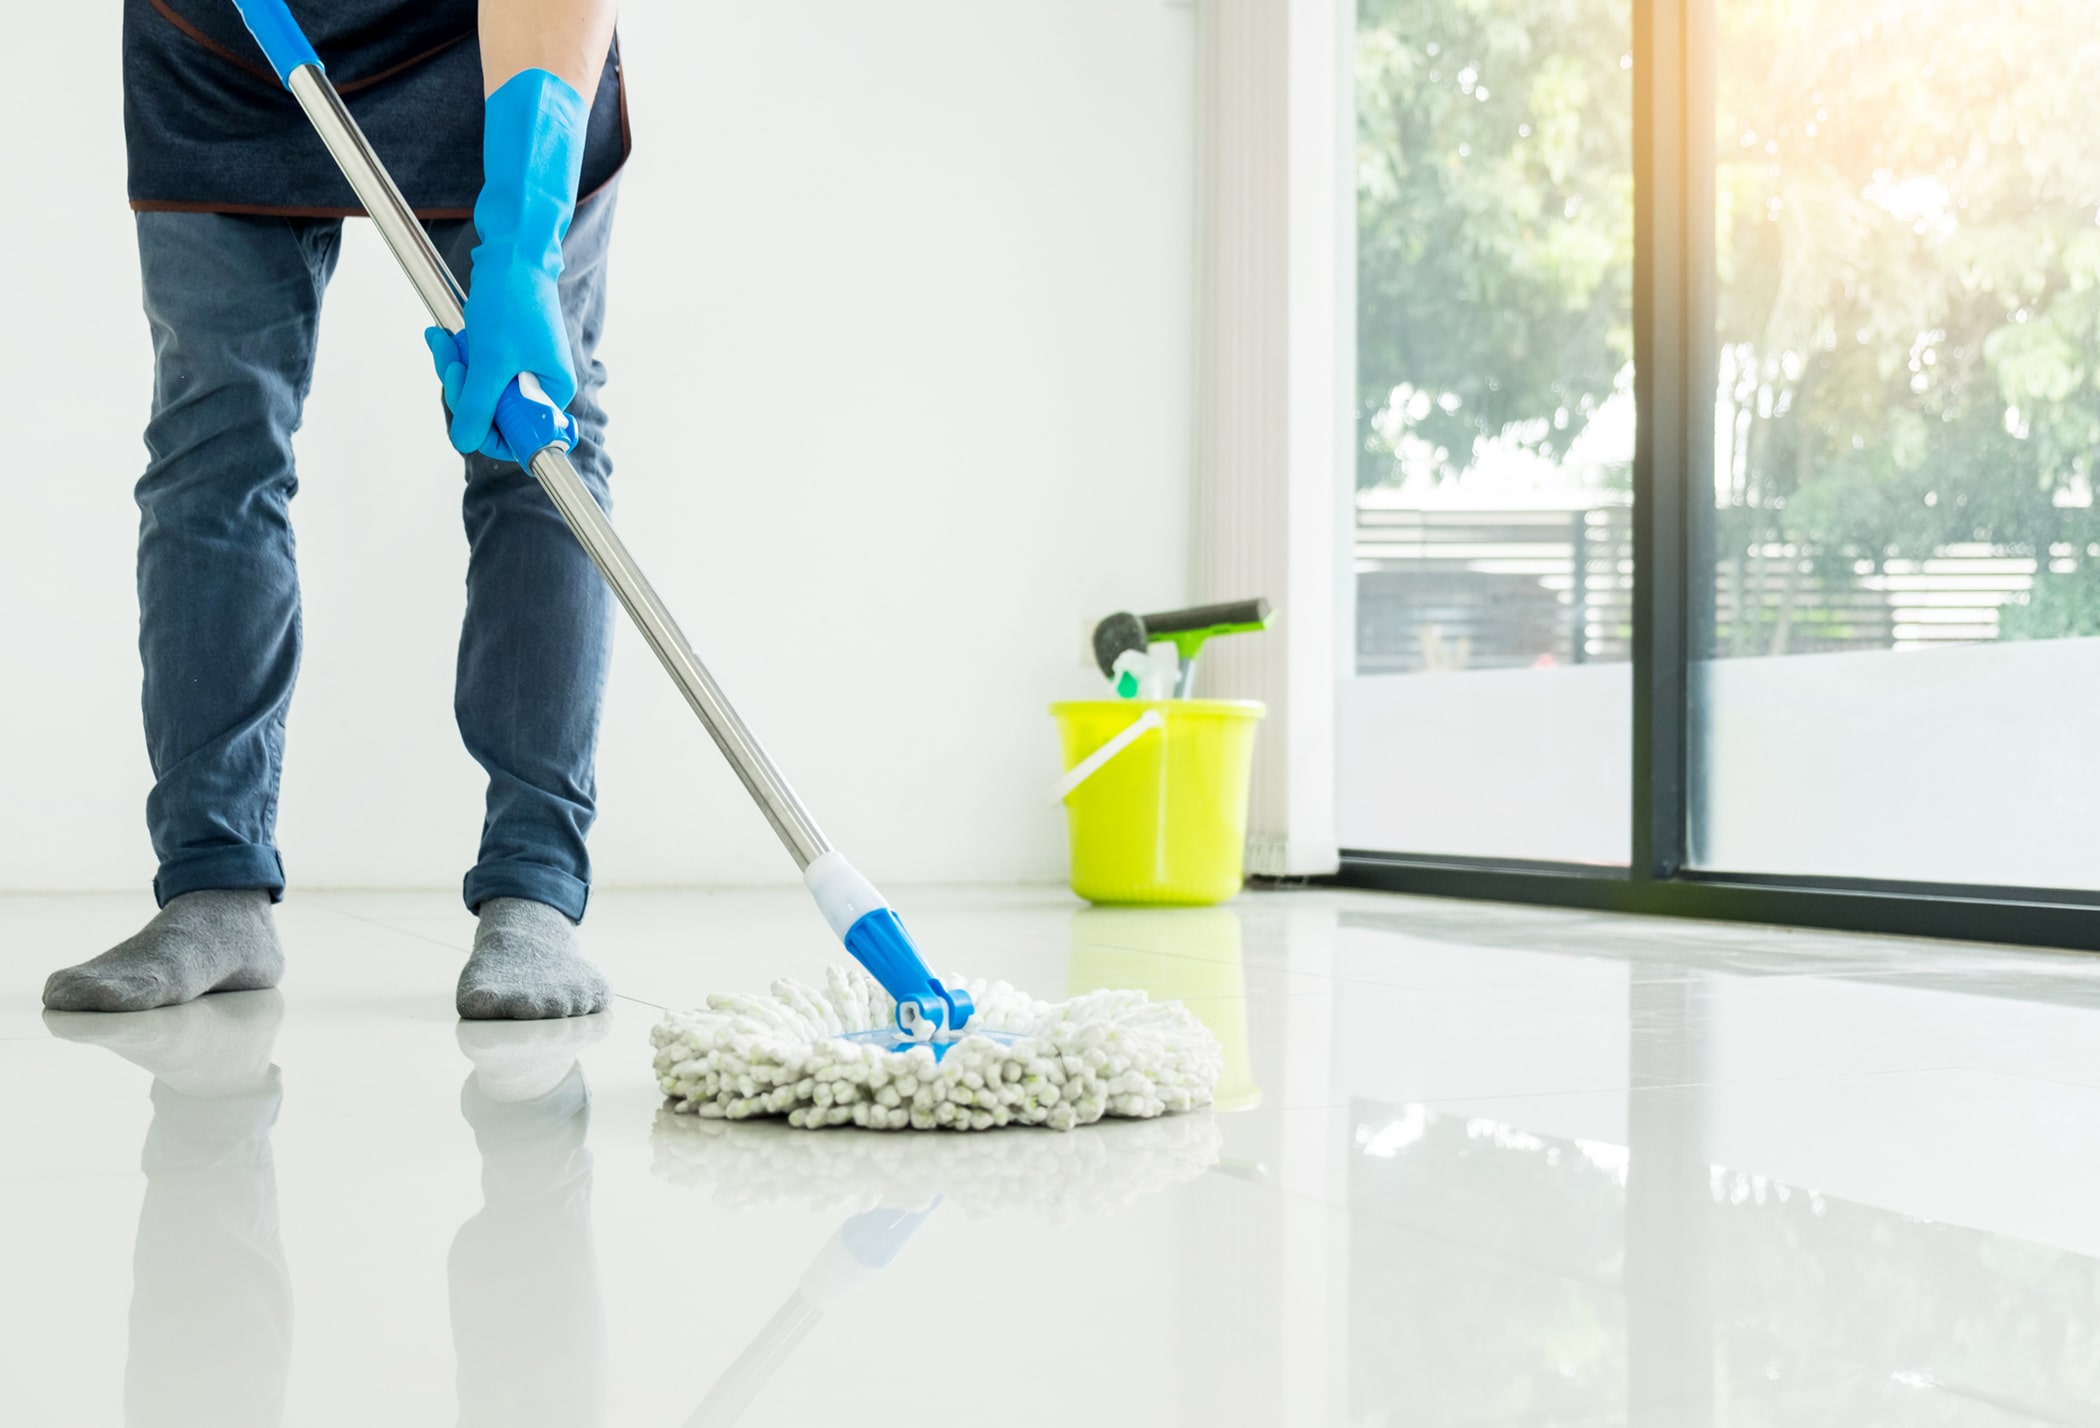 HDB Flats & Apartment Cleaning Services